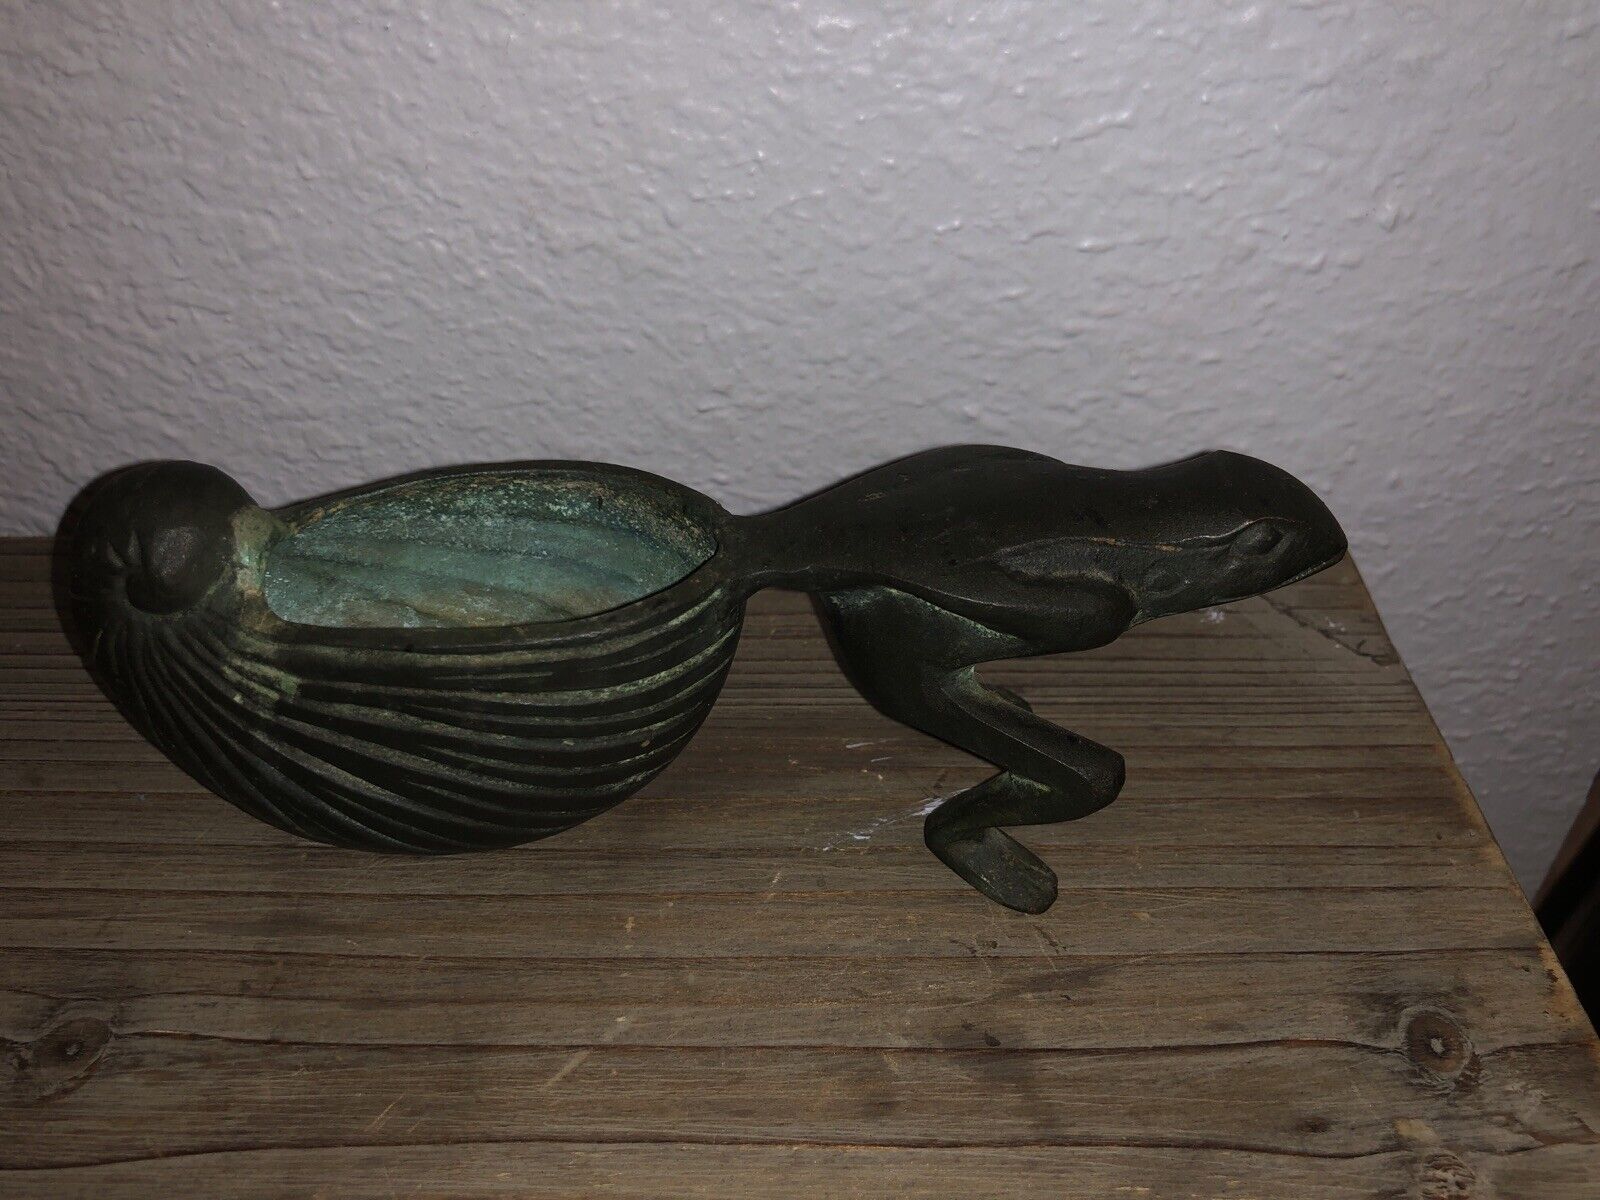 Bronze Frog pulling a Snail Shell Circa 1920